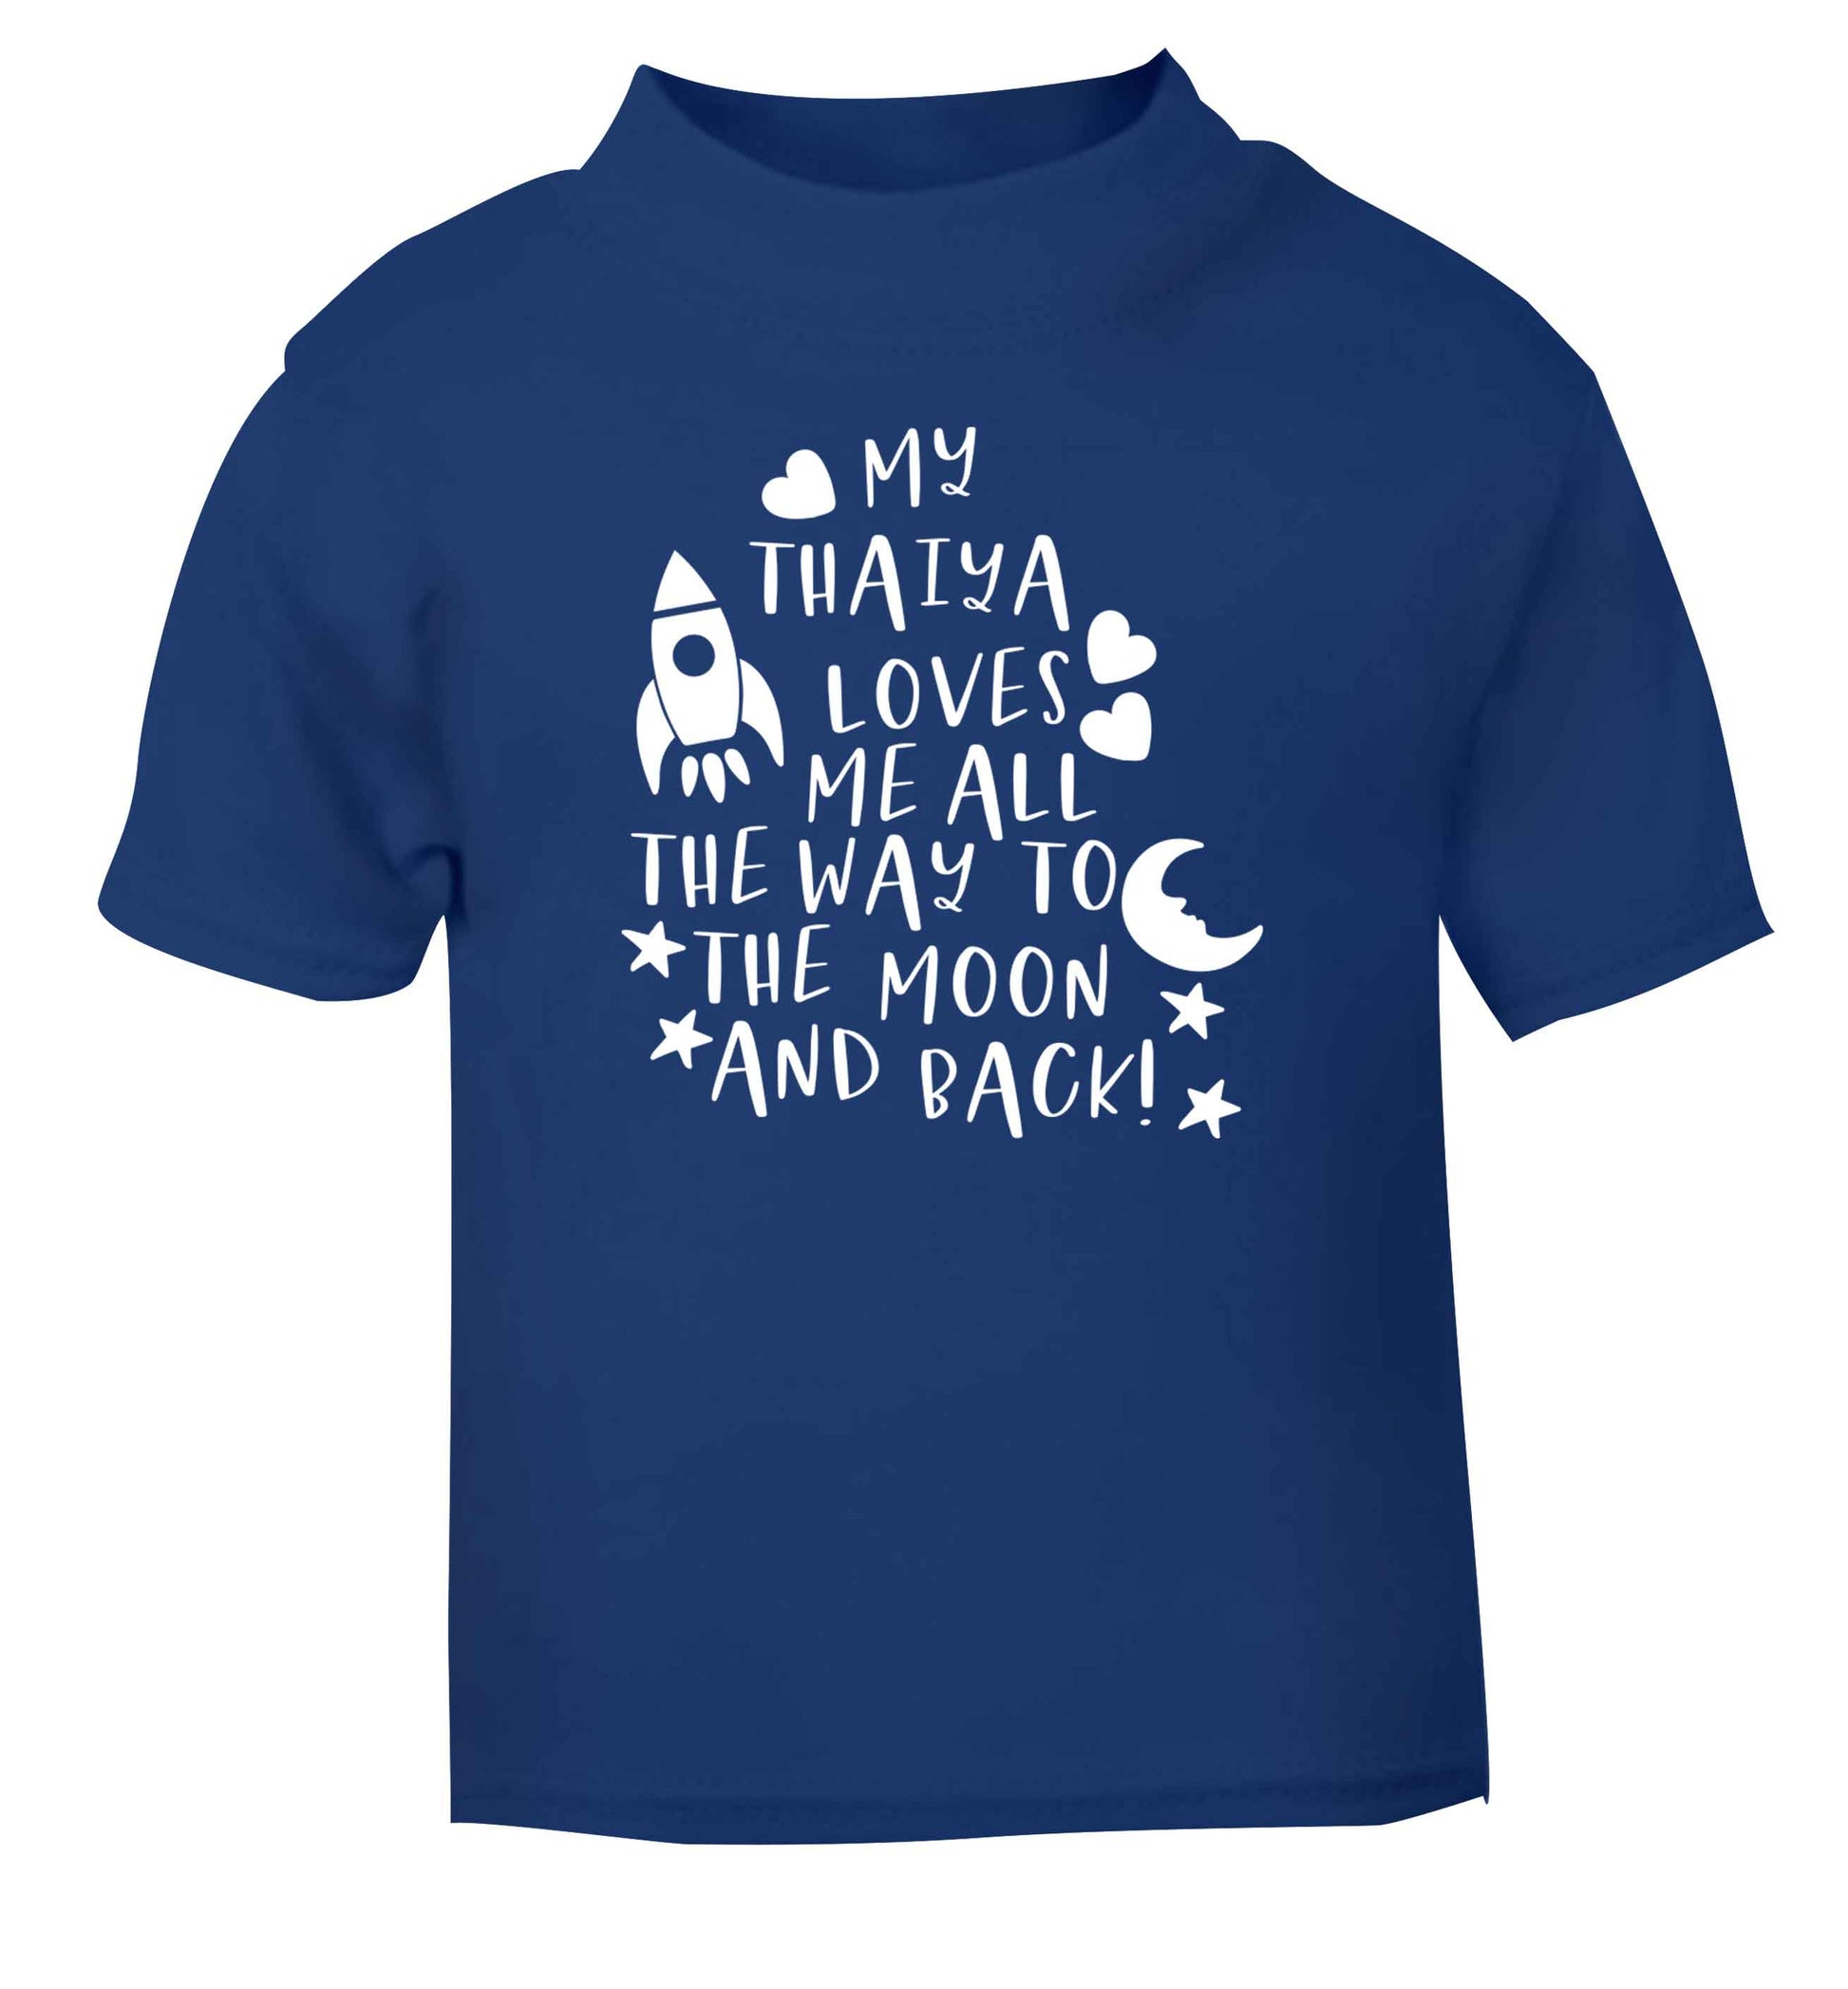 My thaiya loves me all the way to the moon and back blue Baby Toddler Tshirt 2 Years